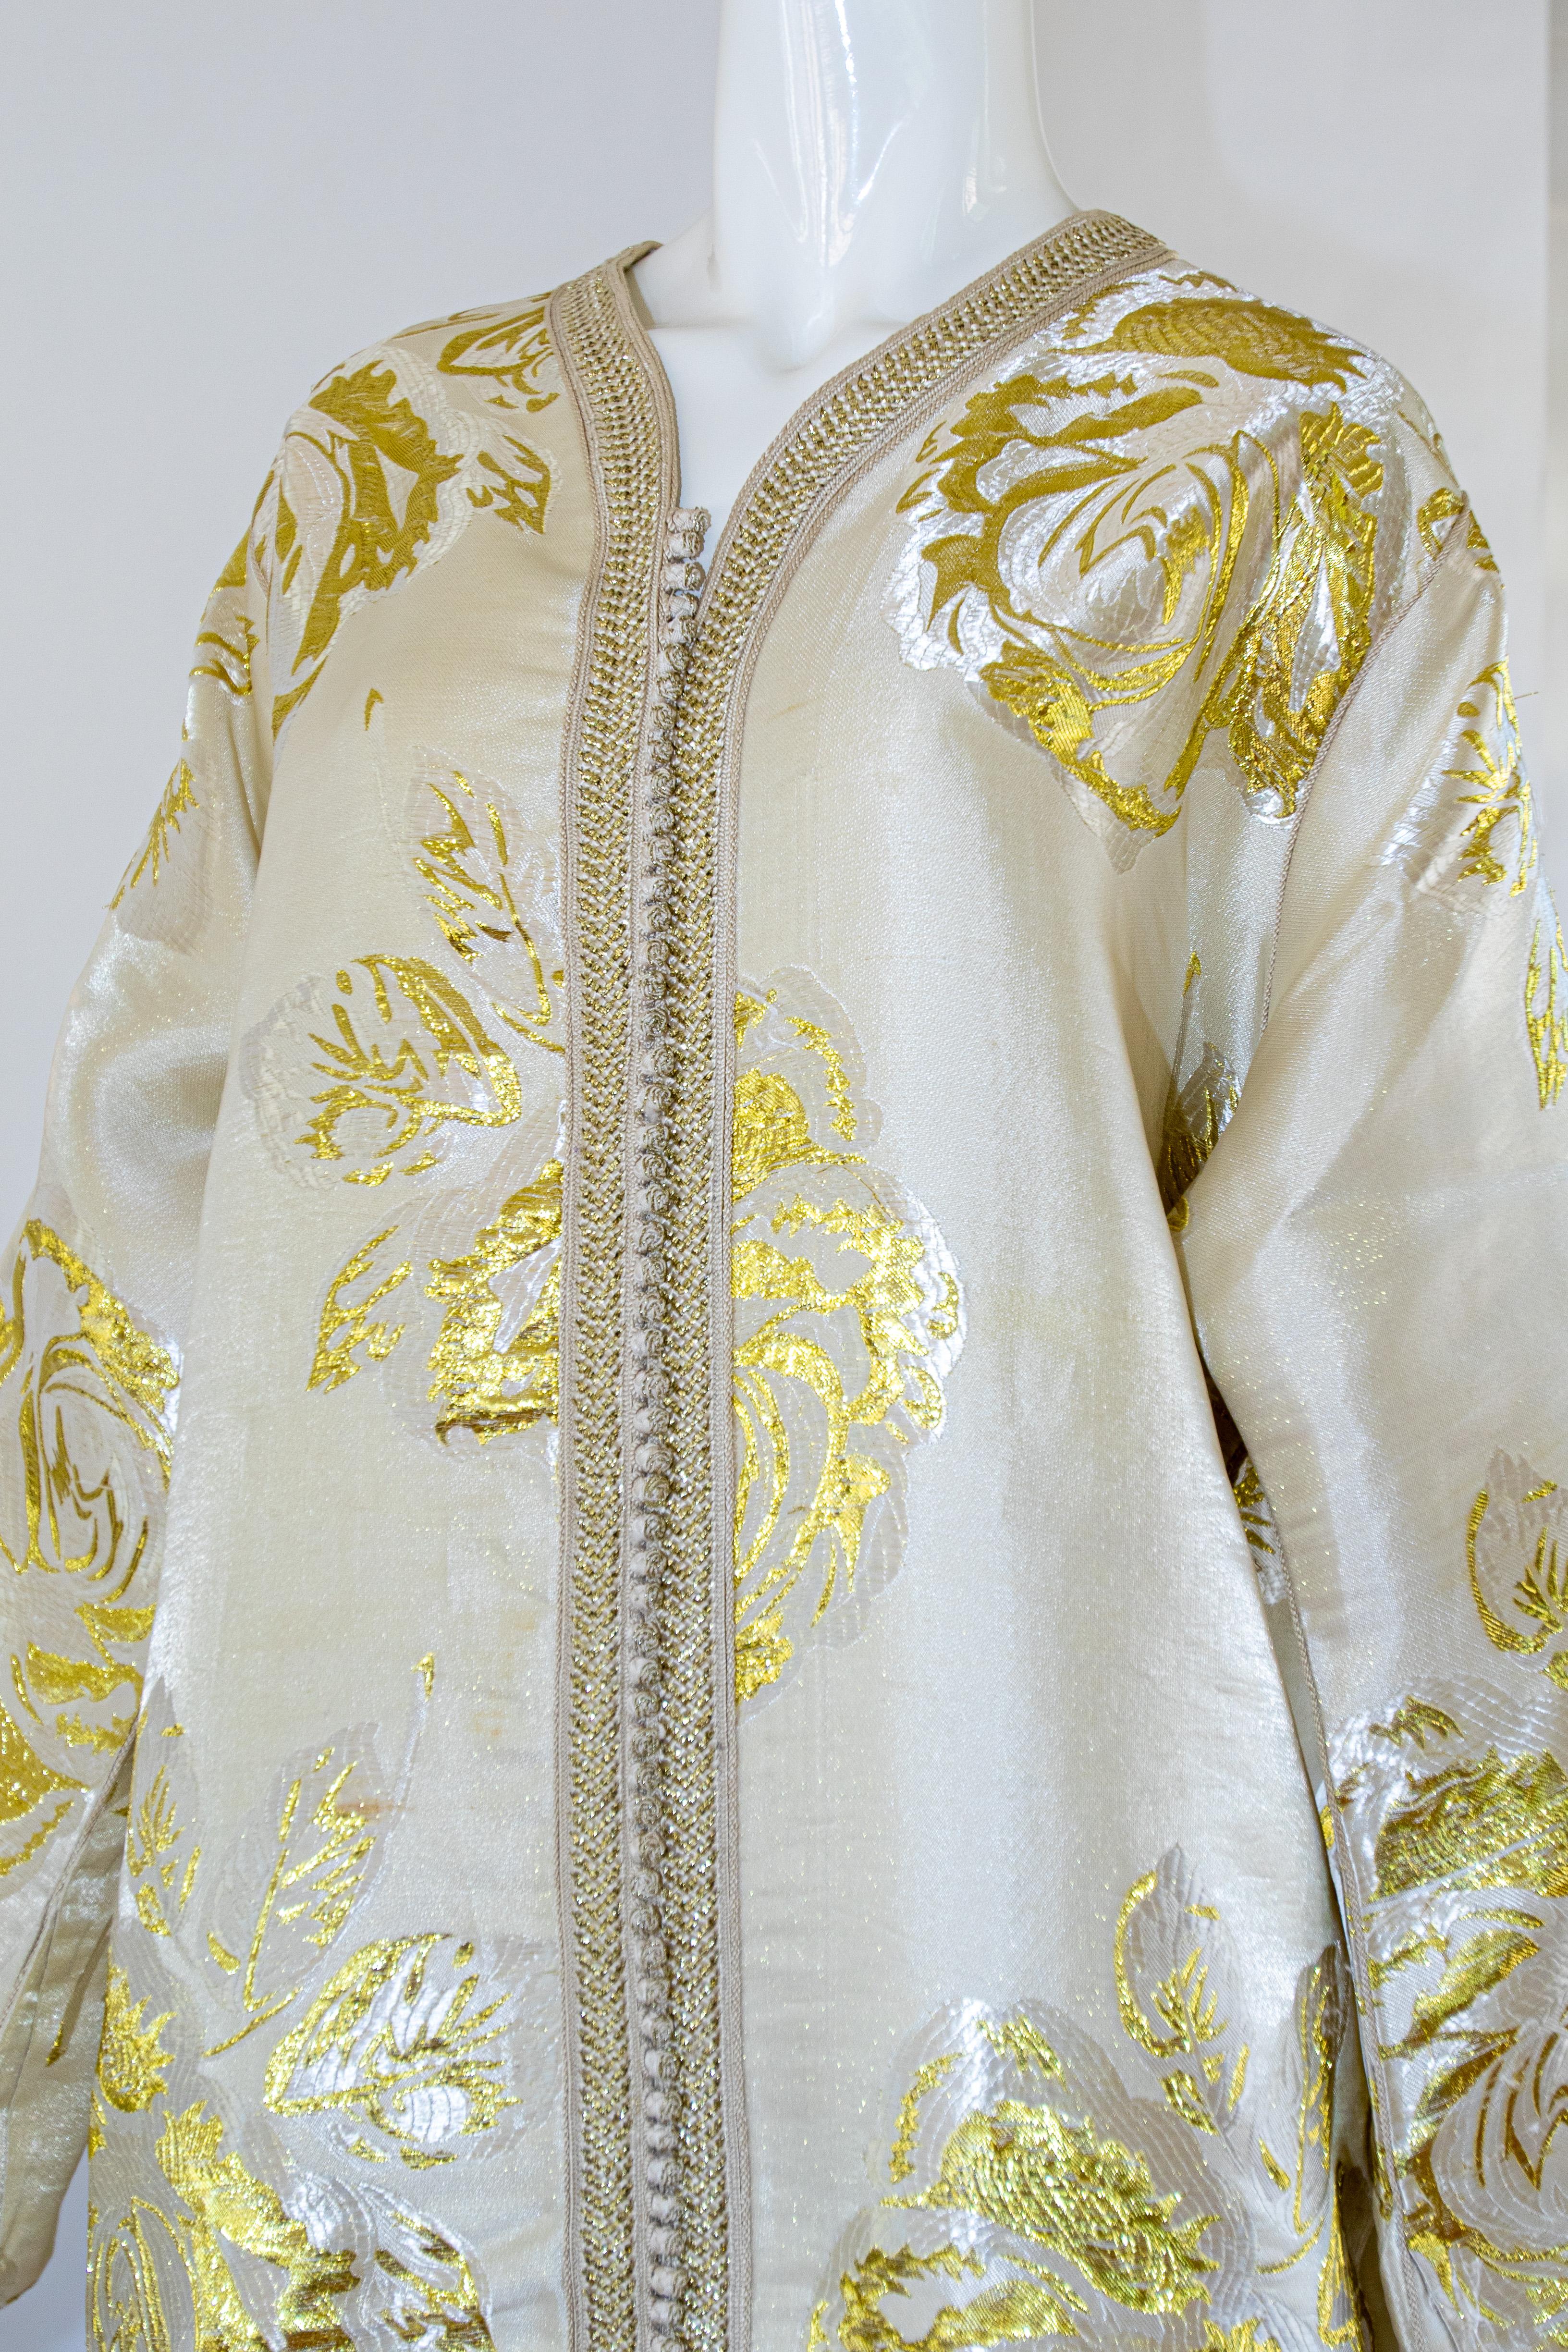 Vintage Moroccan Caftan White and Gold Metallic Floral Brocade For Sale 2